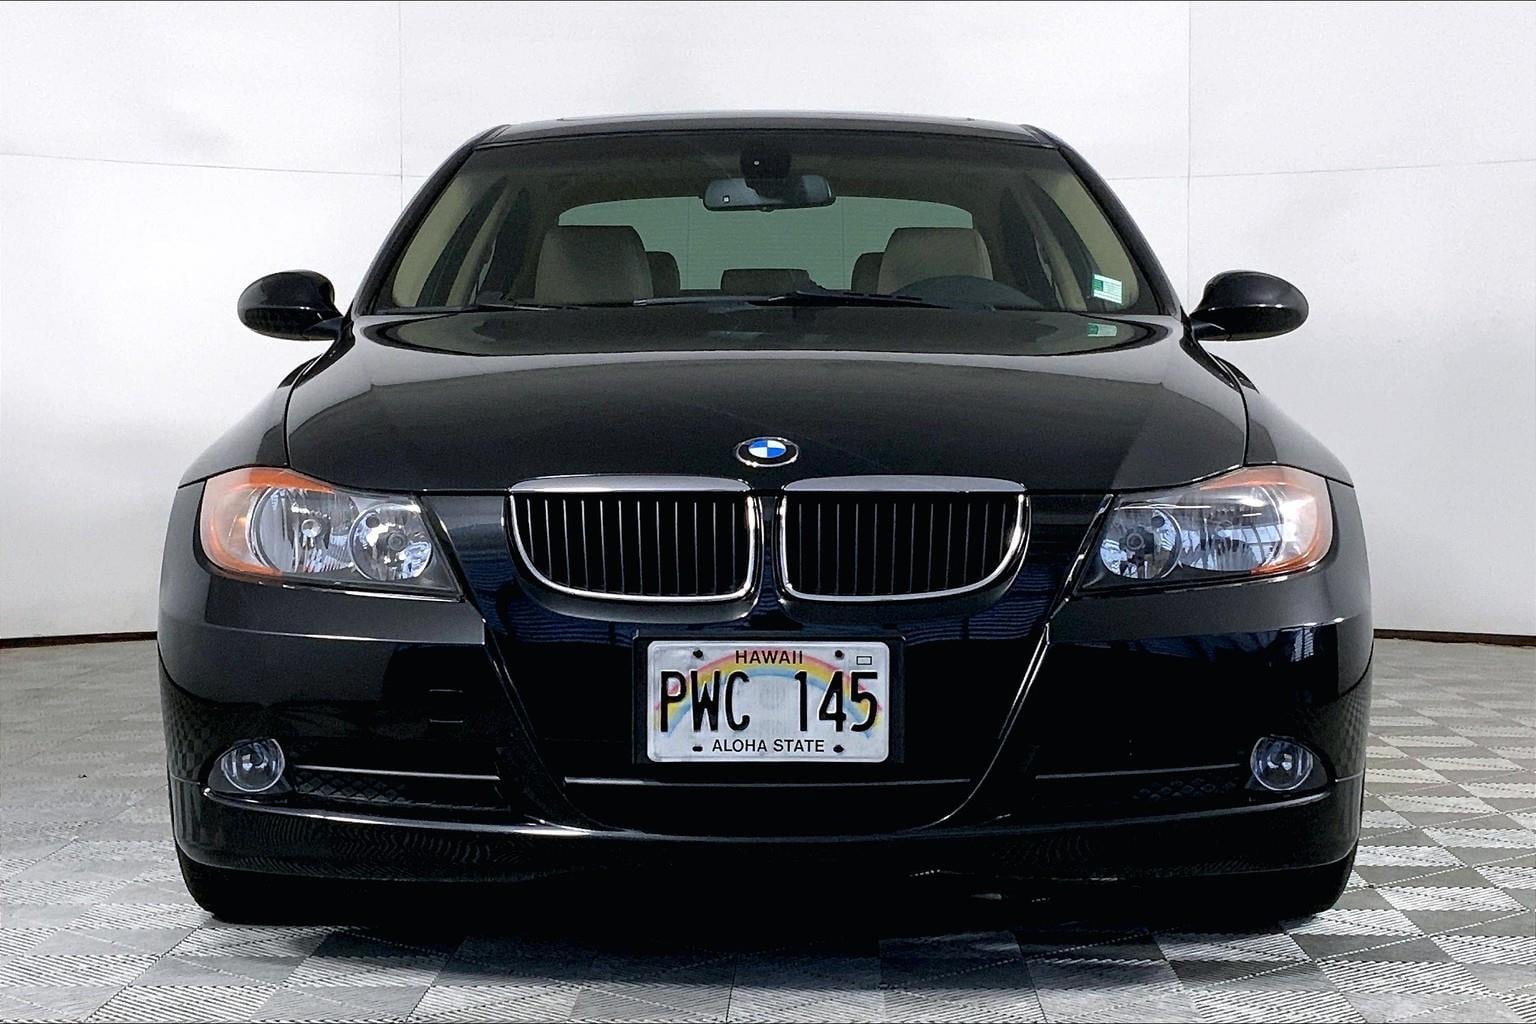 Used 2008 BMW 3 Series 328i with VIN WBAVA33538P143598 for sale in Honolulu, HI